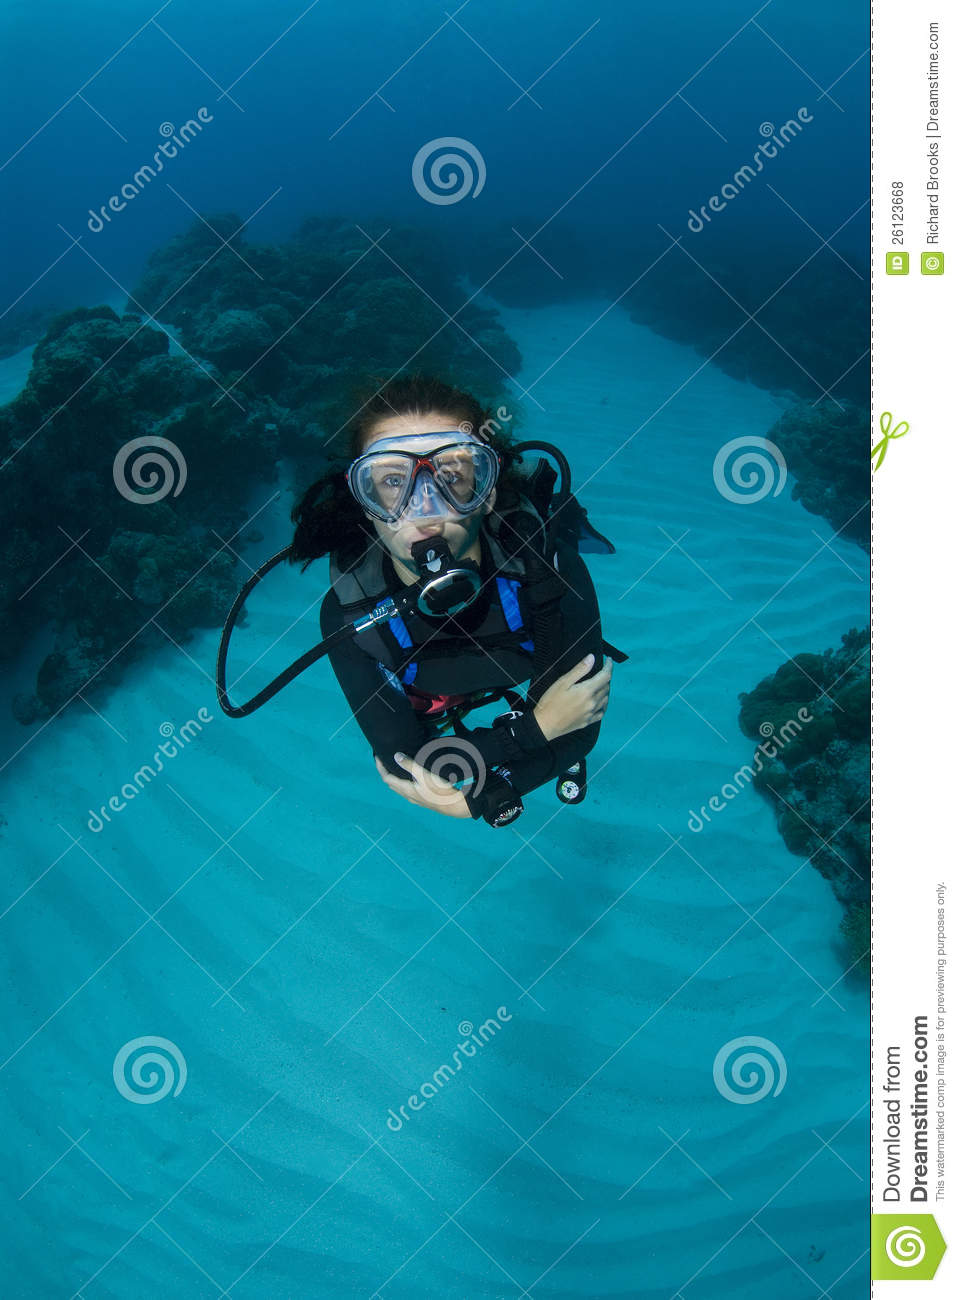 Young Female Scuba Diver Royalty Free Stock Photos   Image  26123668